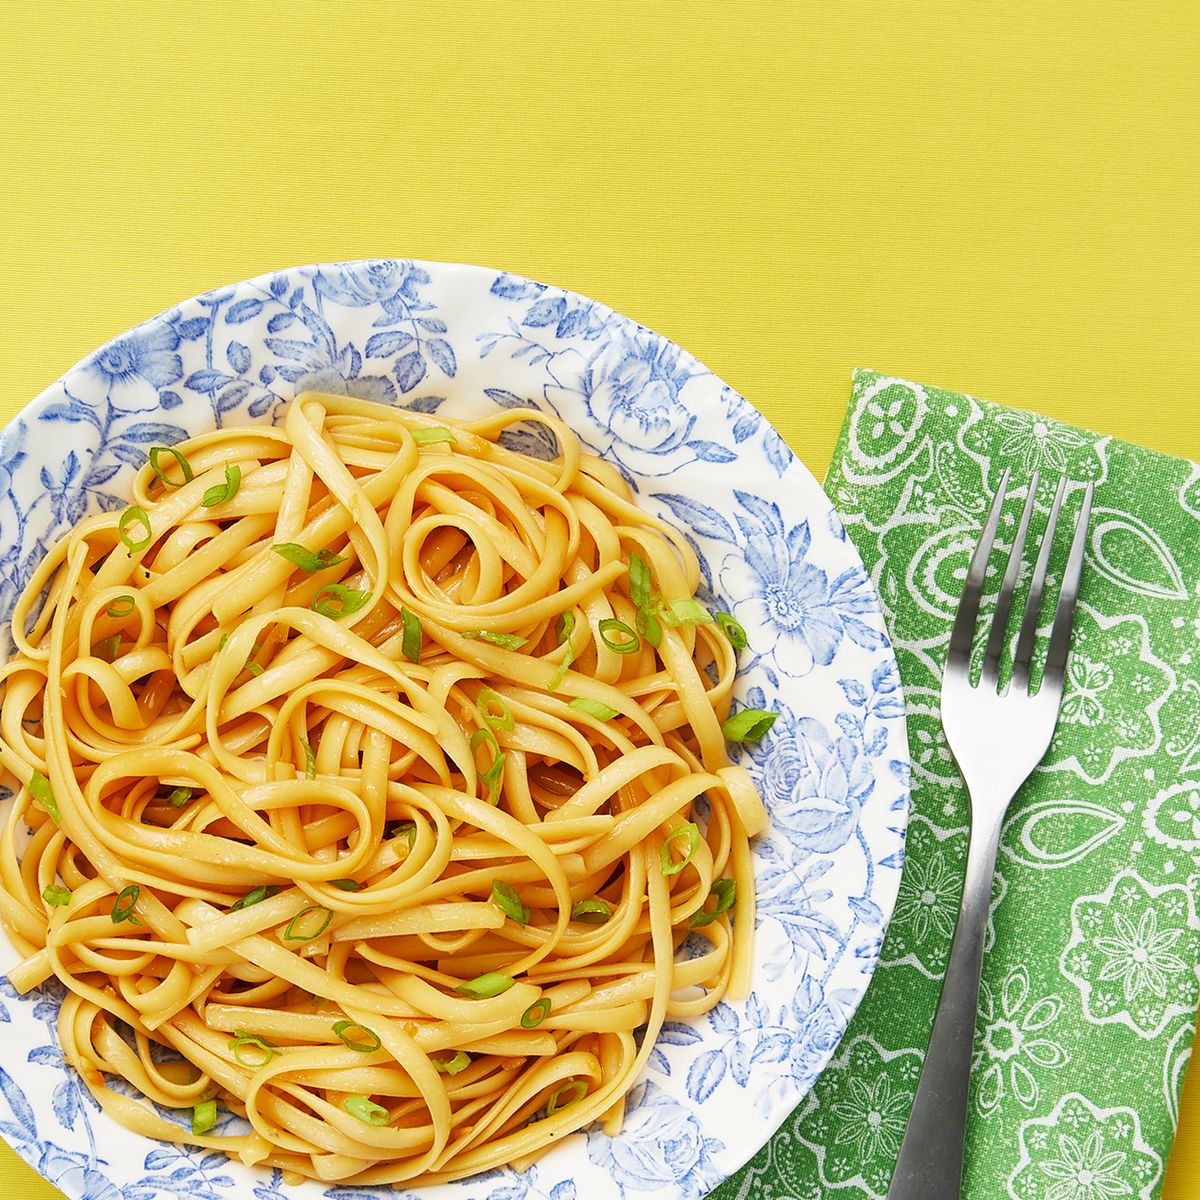 the pioneer woman's sesame noodles recipe